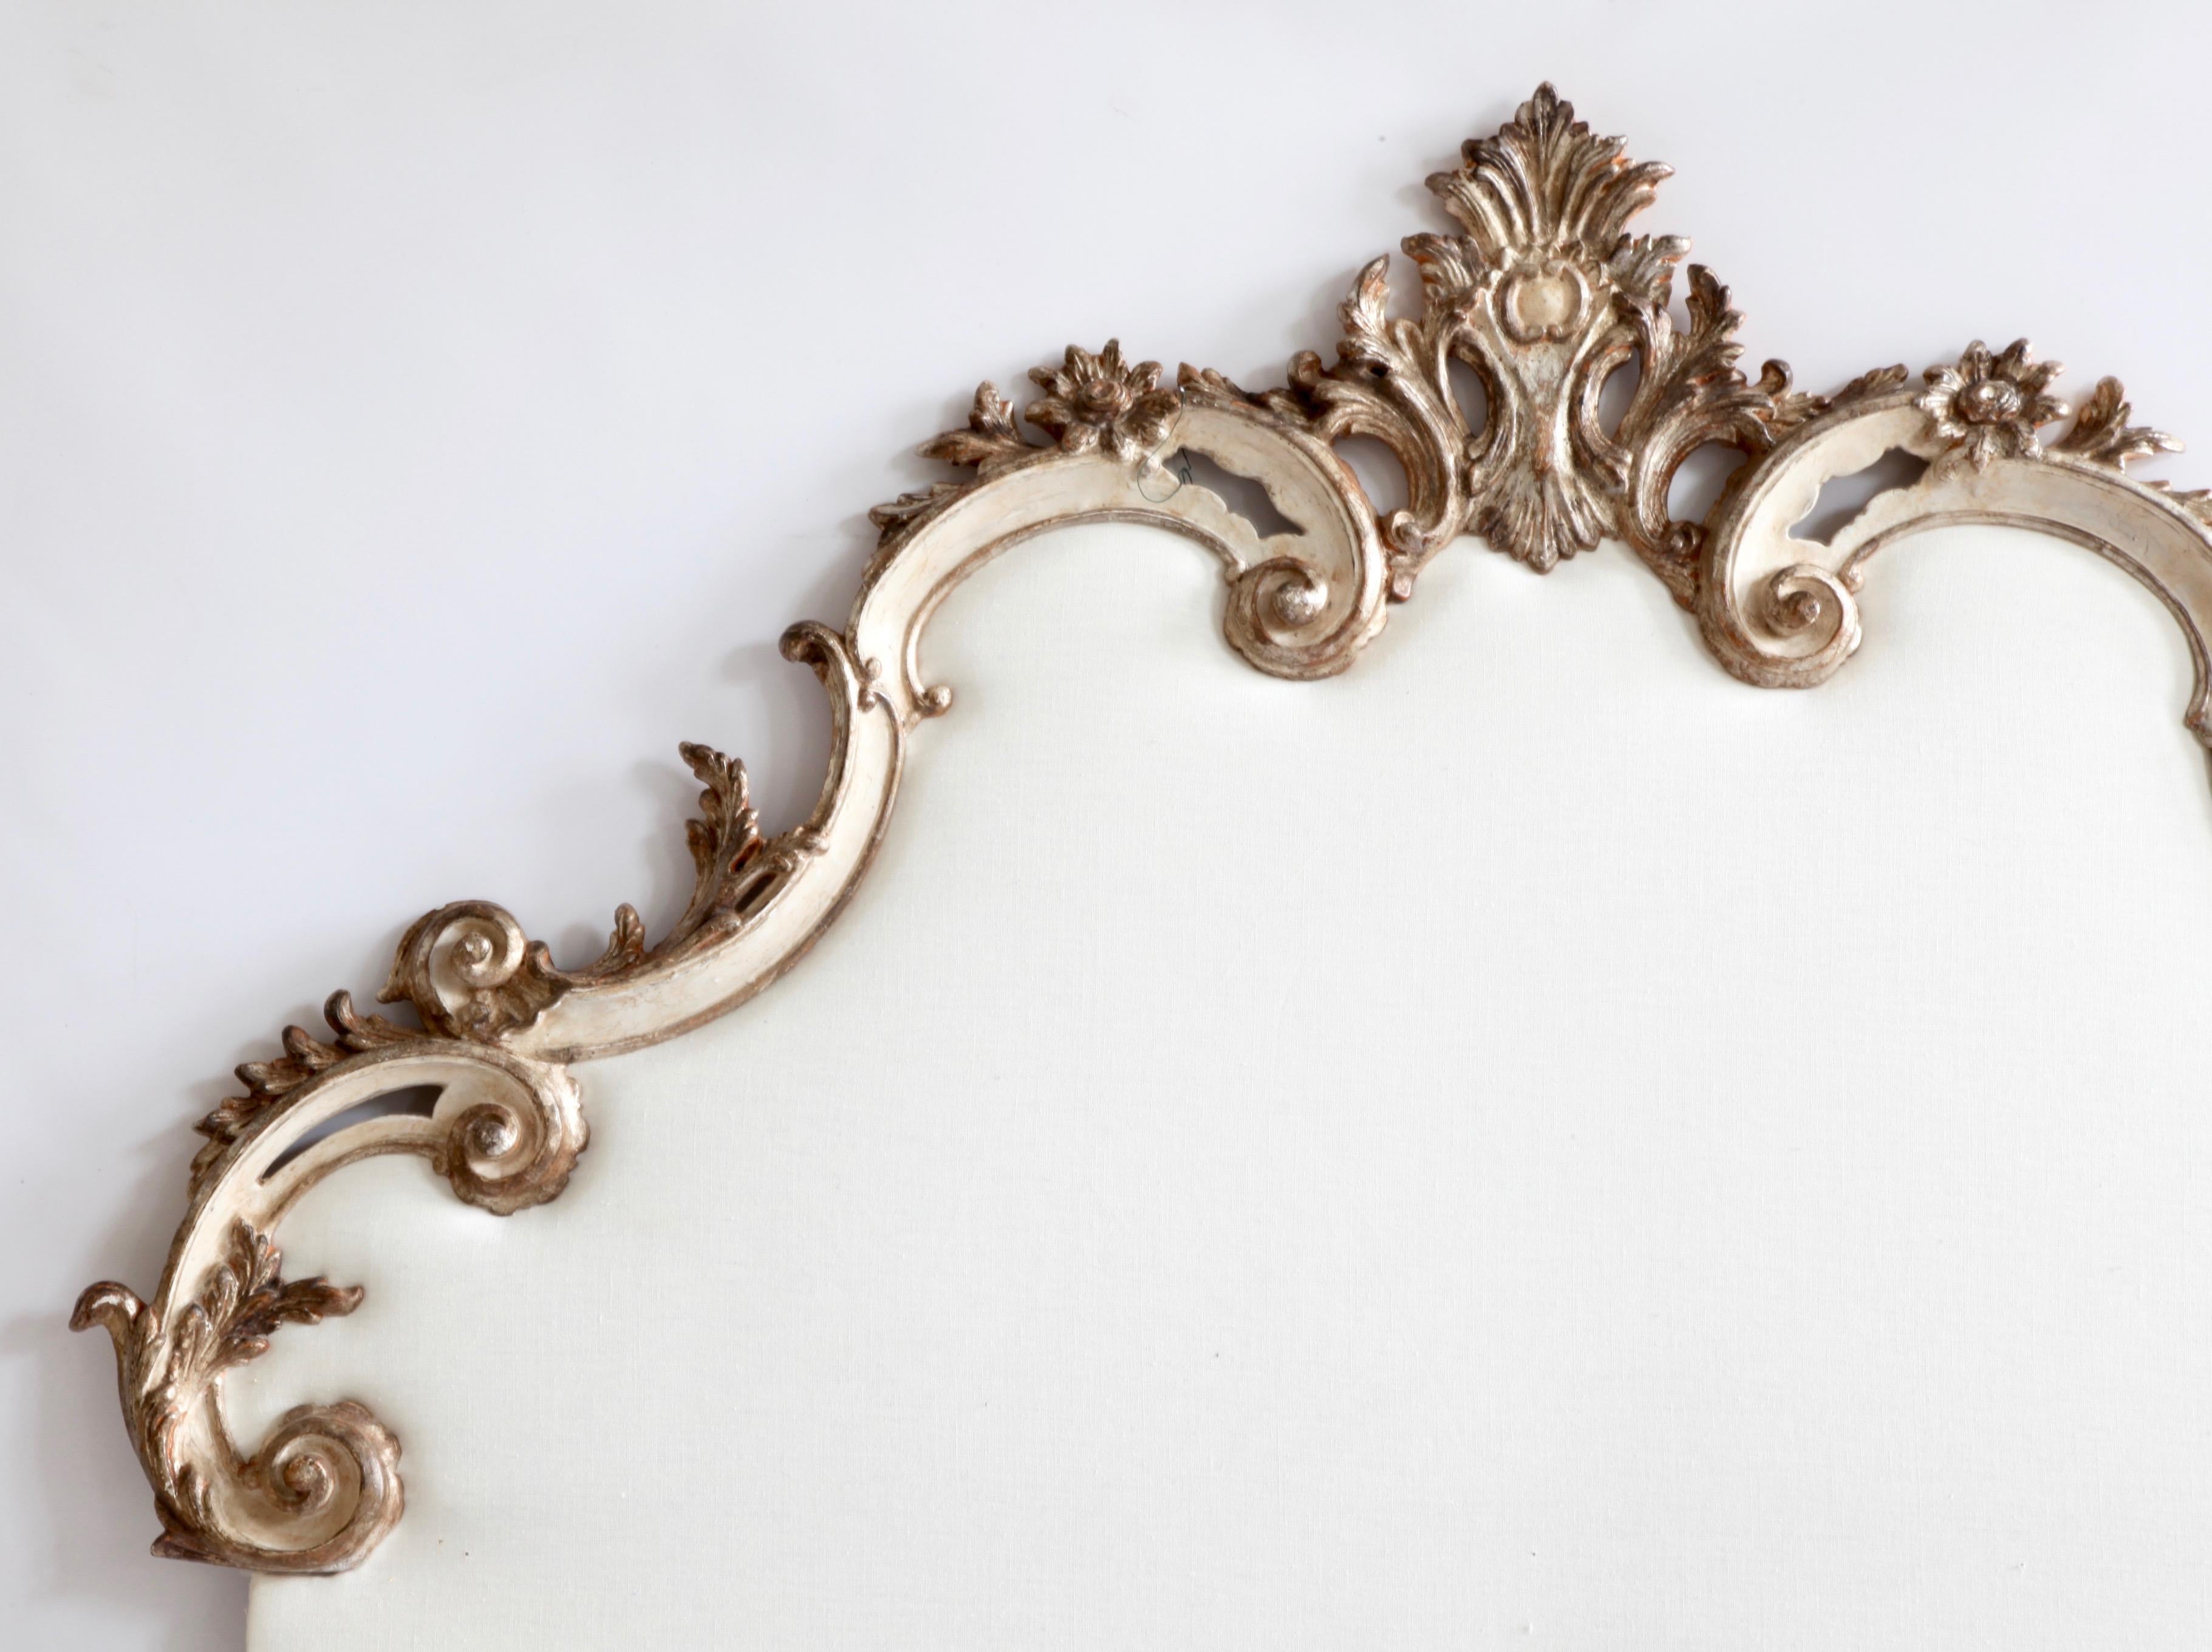 Hand-Carved Early 20th Century Venetian Headboard in Antique White with Silver Highlights